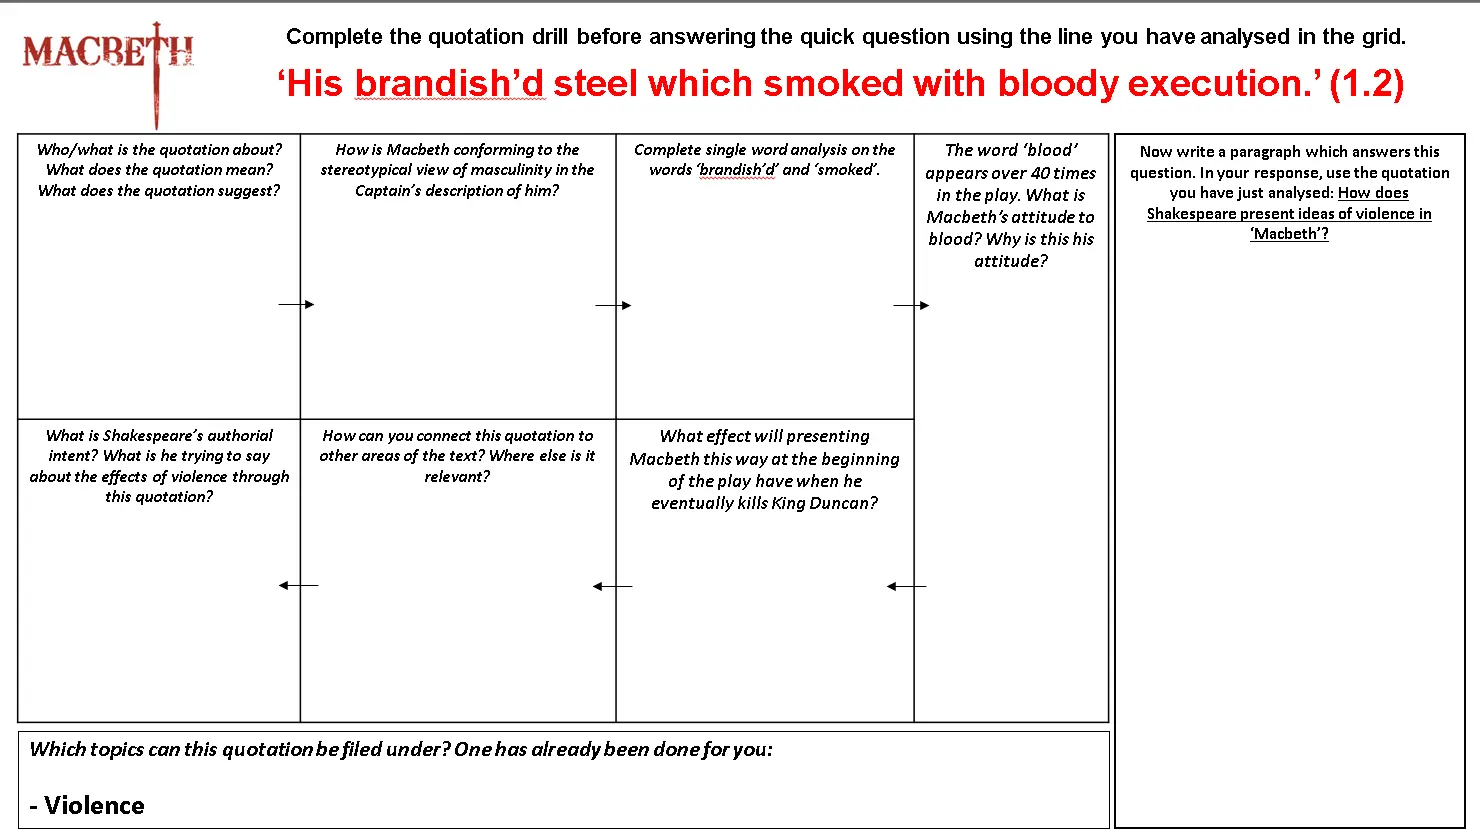 his brandished steel which smoked with bloody execution - What does brandish D steel mean in Macbeth